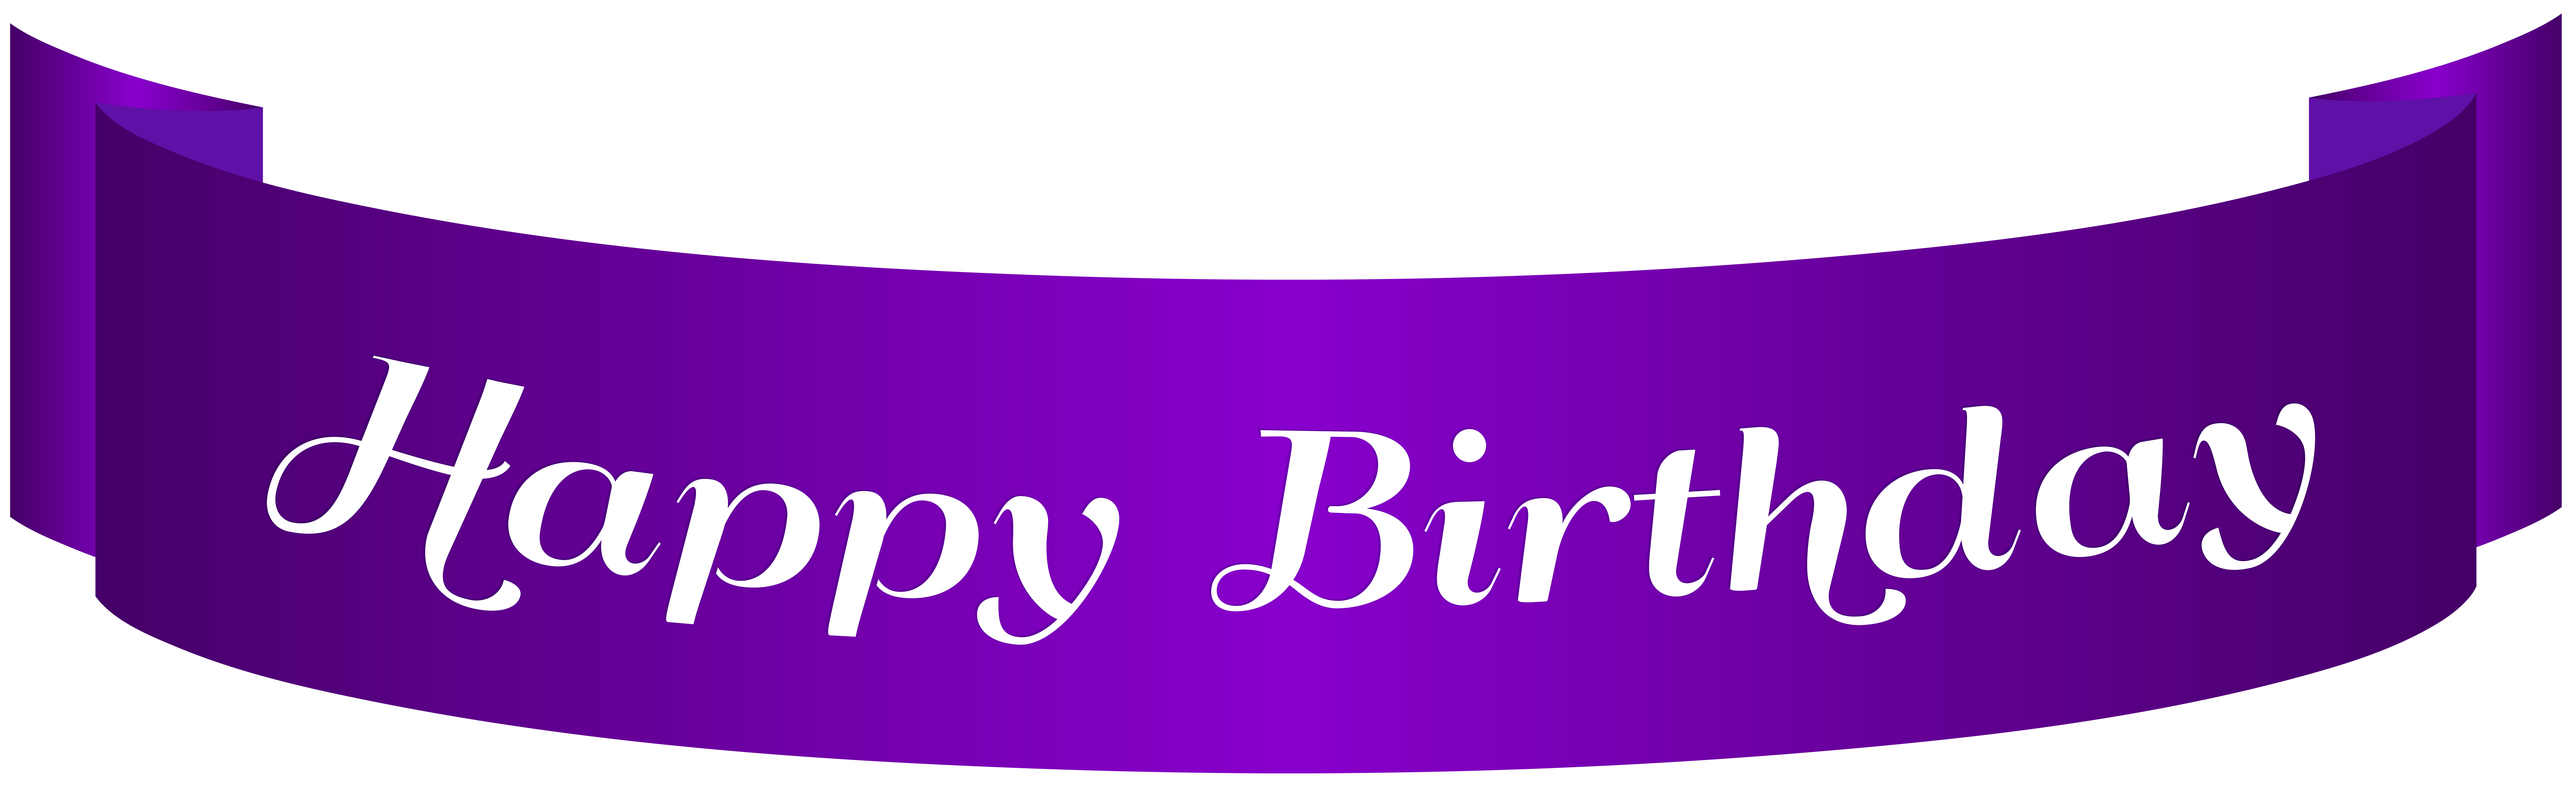 Happy Birthday Purple Banner PNG Clip Art Quality Image And Transparent PNG Free Clipart